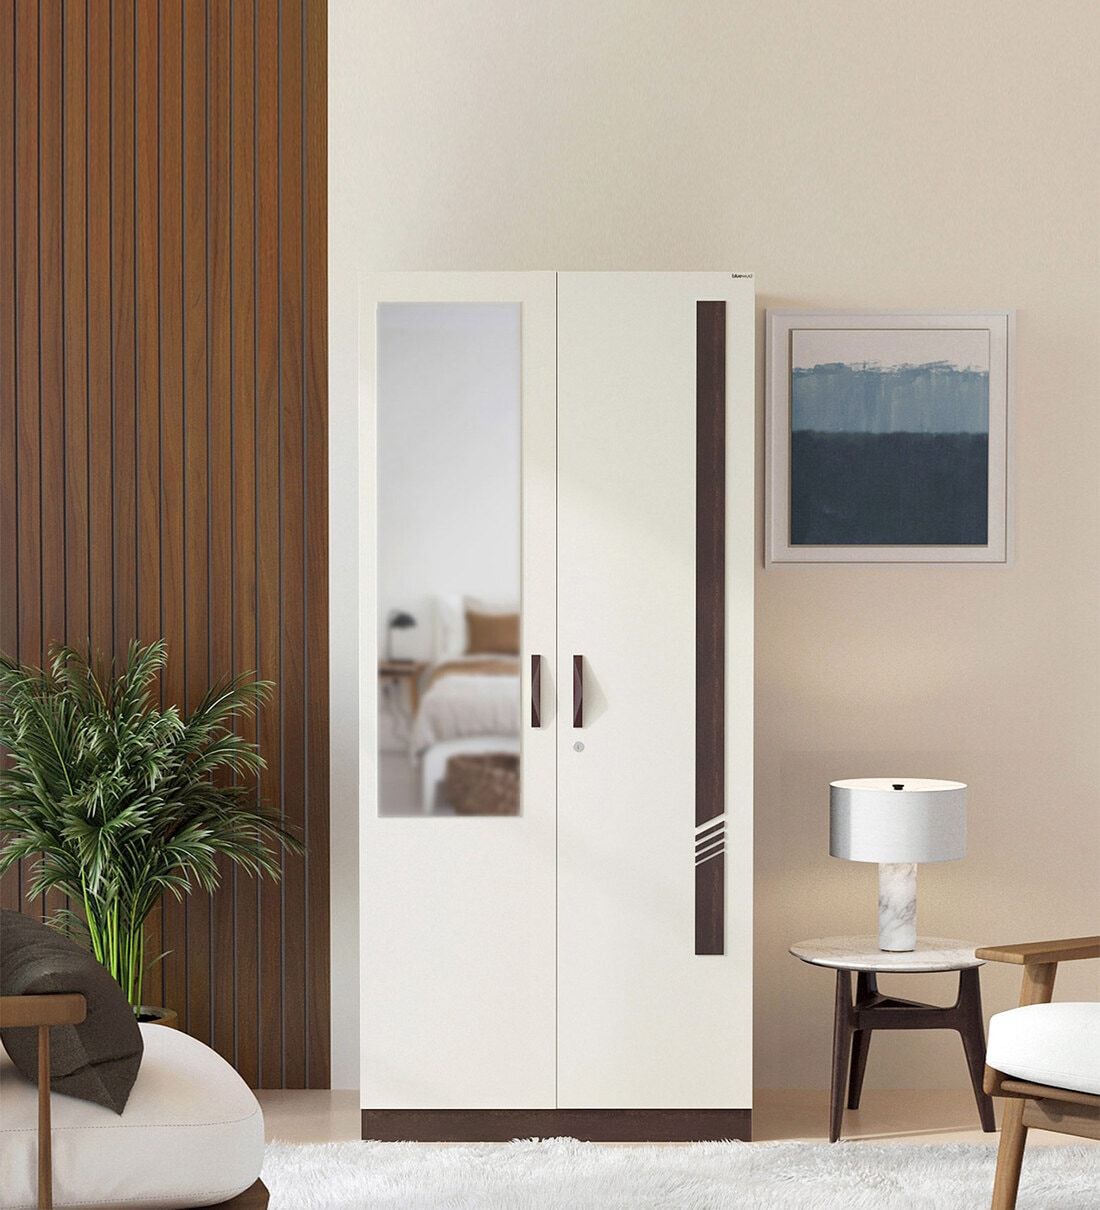 Buy Andrie 2 Door Wardrobe In Wenge & White Finish With Mirror At 26% Off Bluewud | Pepperfry Regarding 2 Door Wardrobes (Photo 1 of 15)